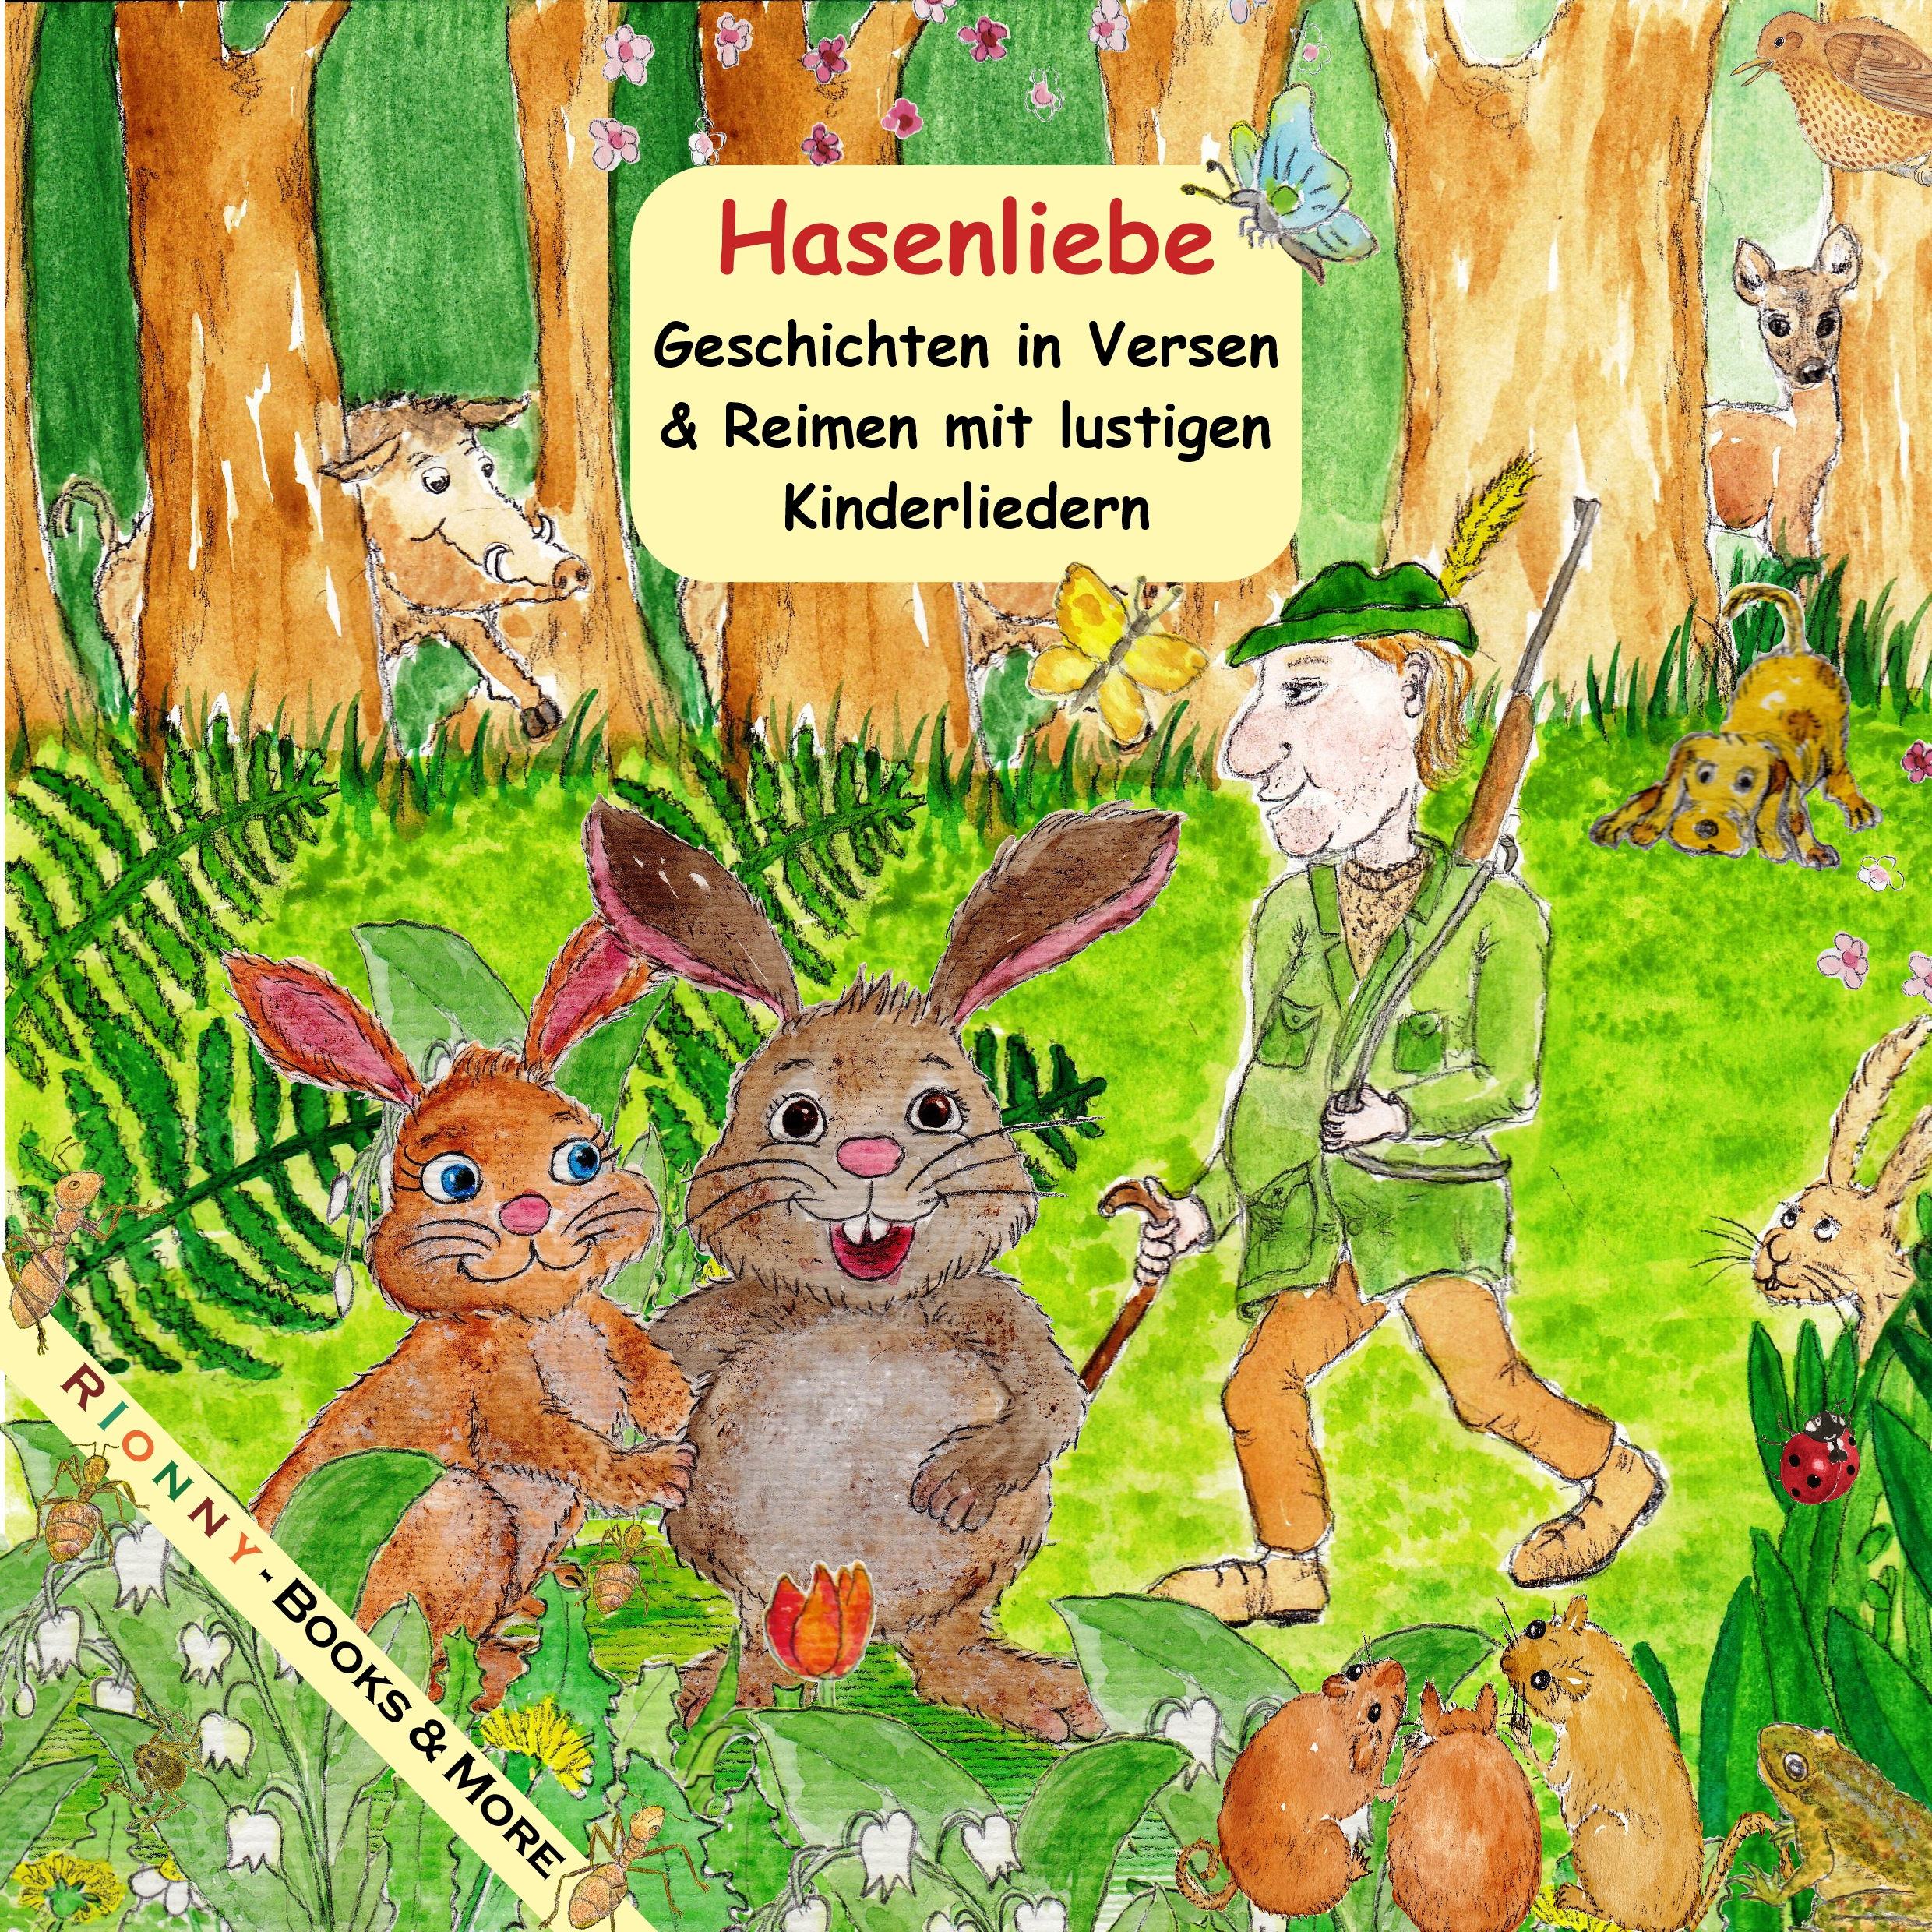 Hasenliebe